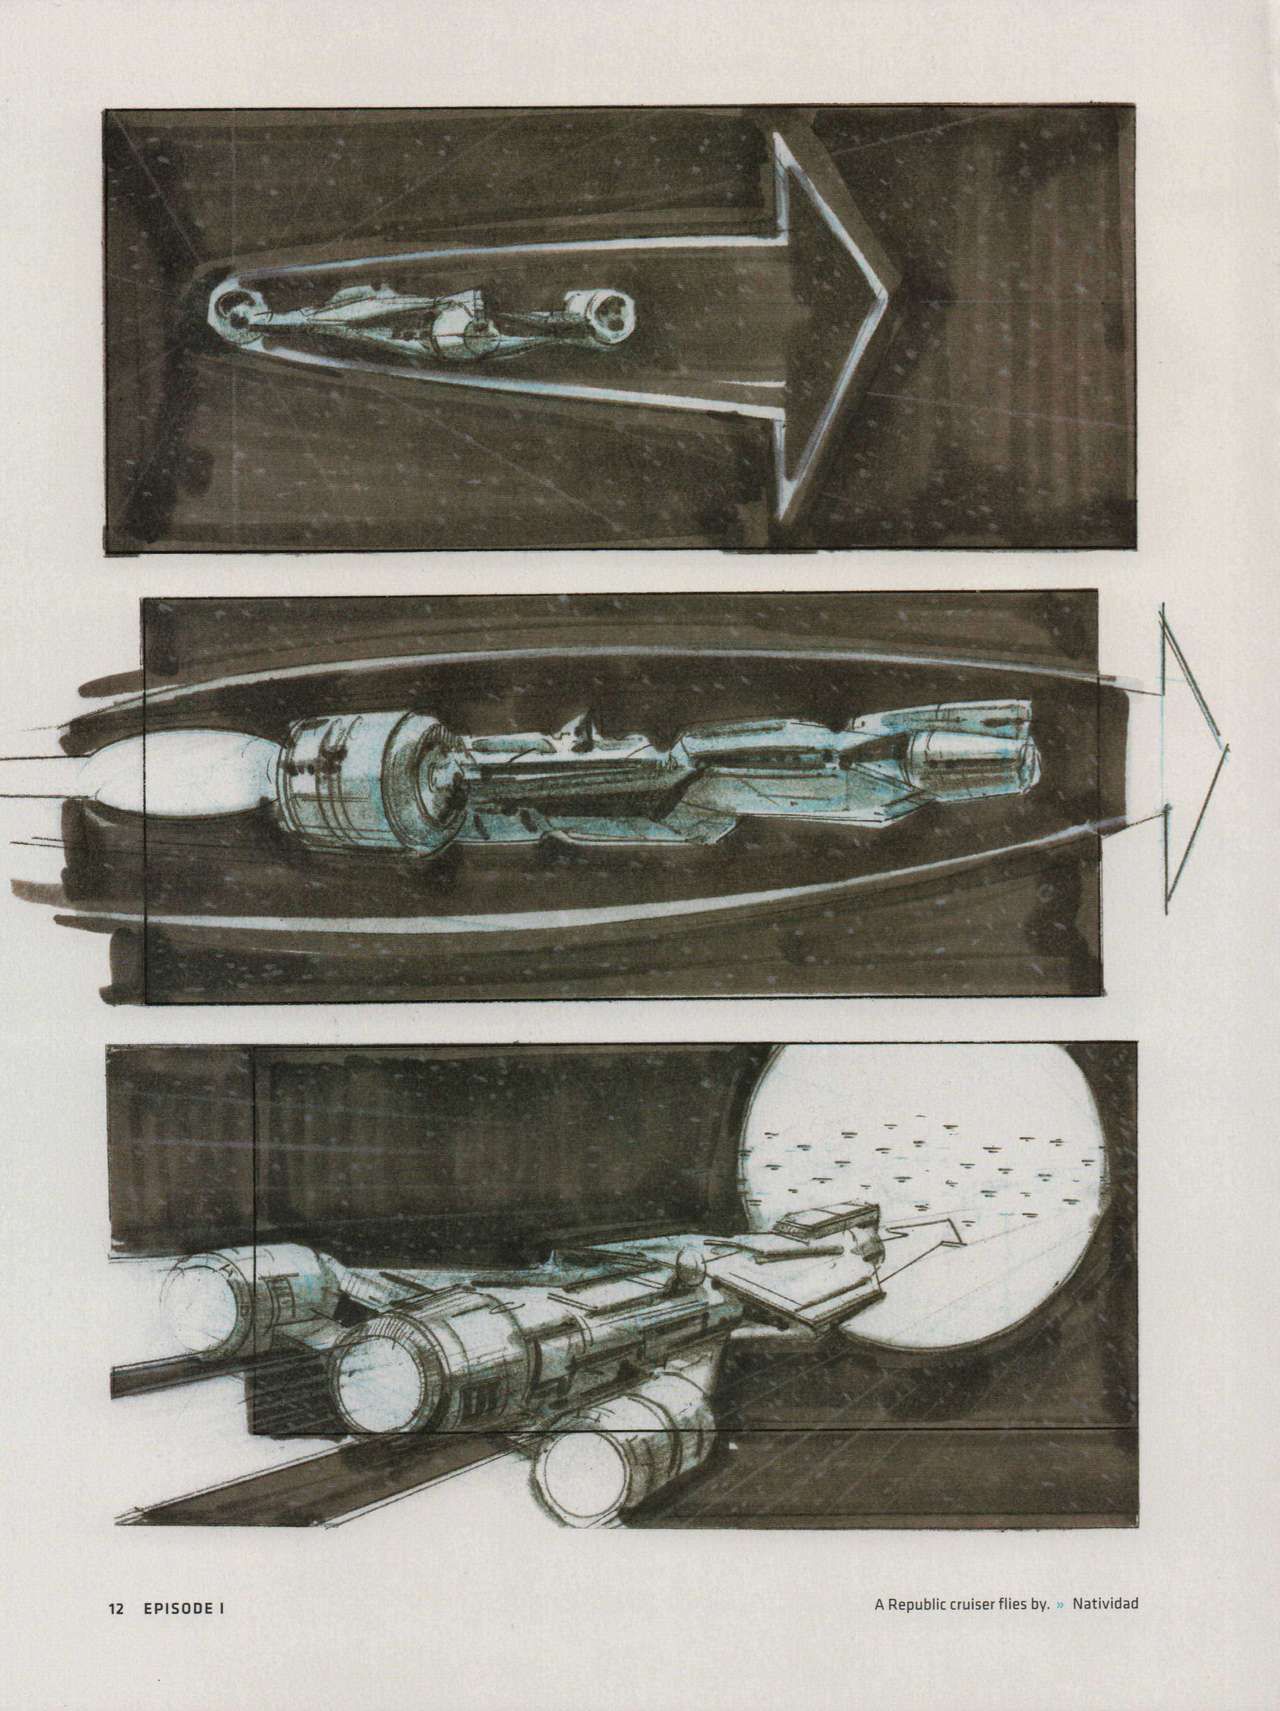 Star Wars Storyboards - The Prequel Trilogy 16